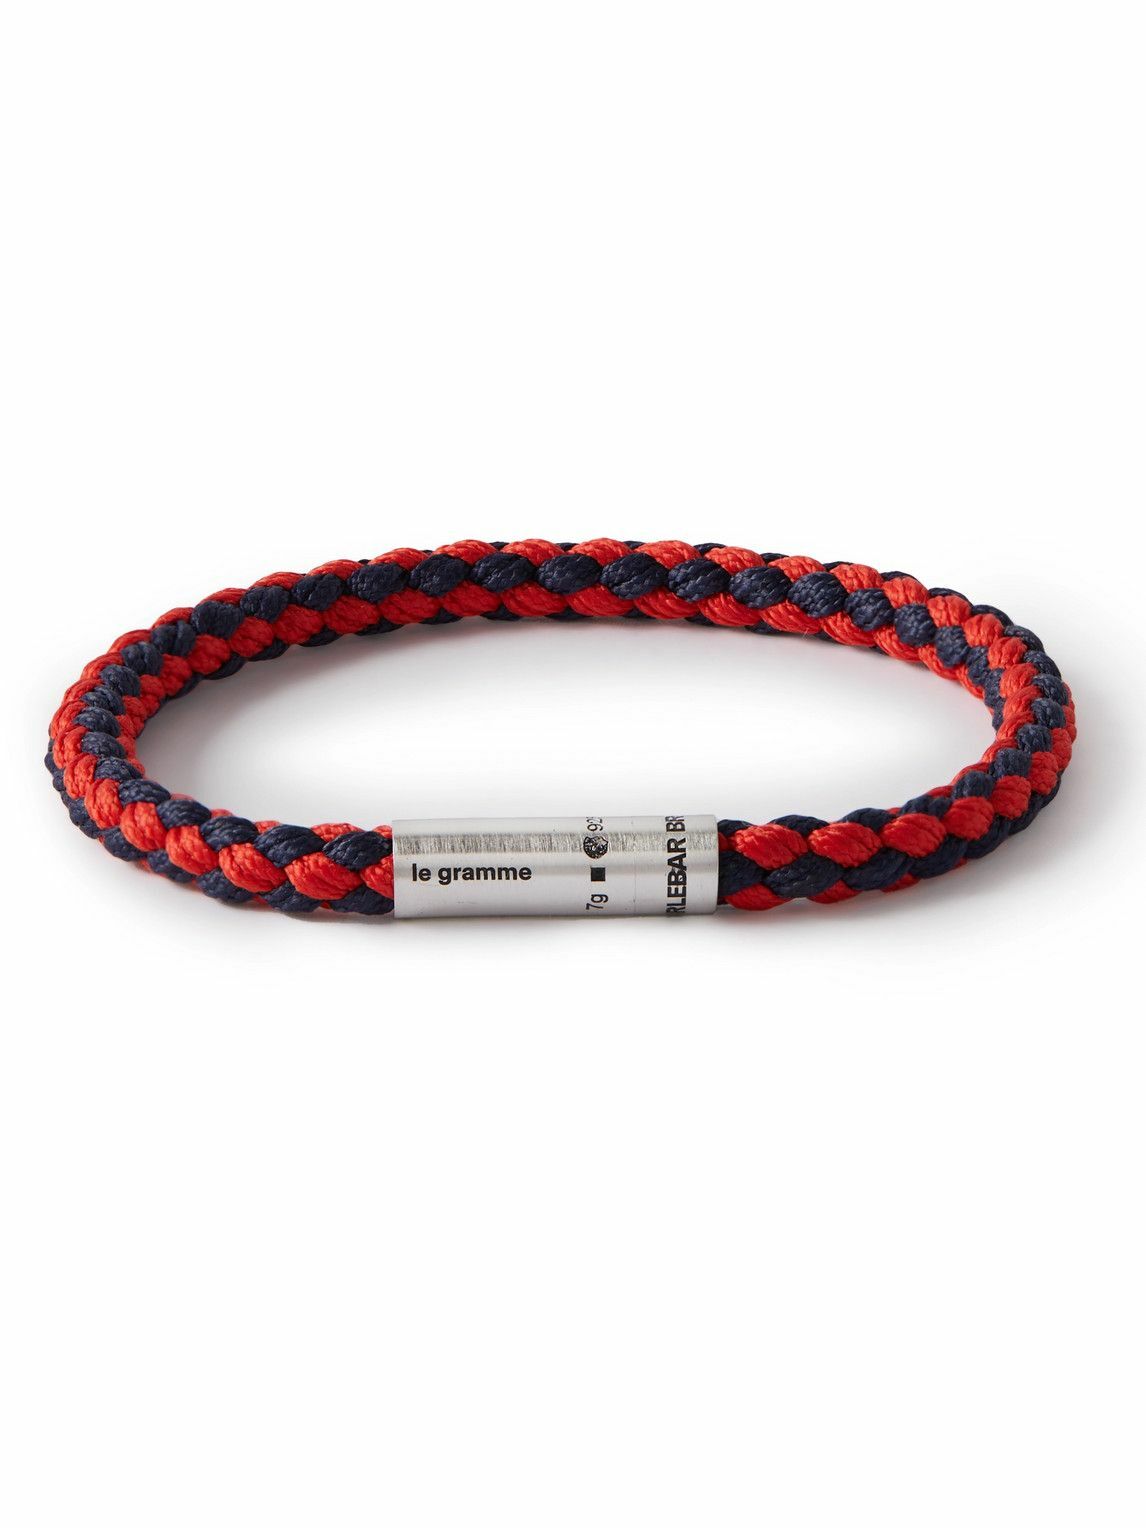 Photo: Le Gramme - Orlebar Brown 7g Woven Cord and Sterling Silver Bracelet - Red